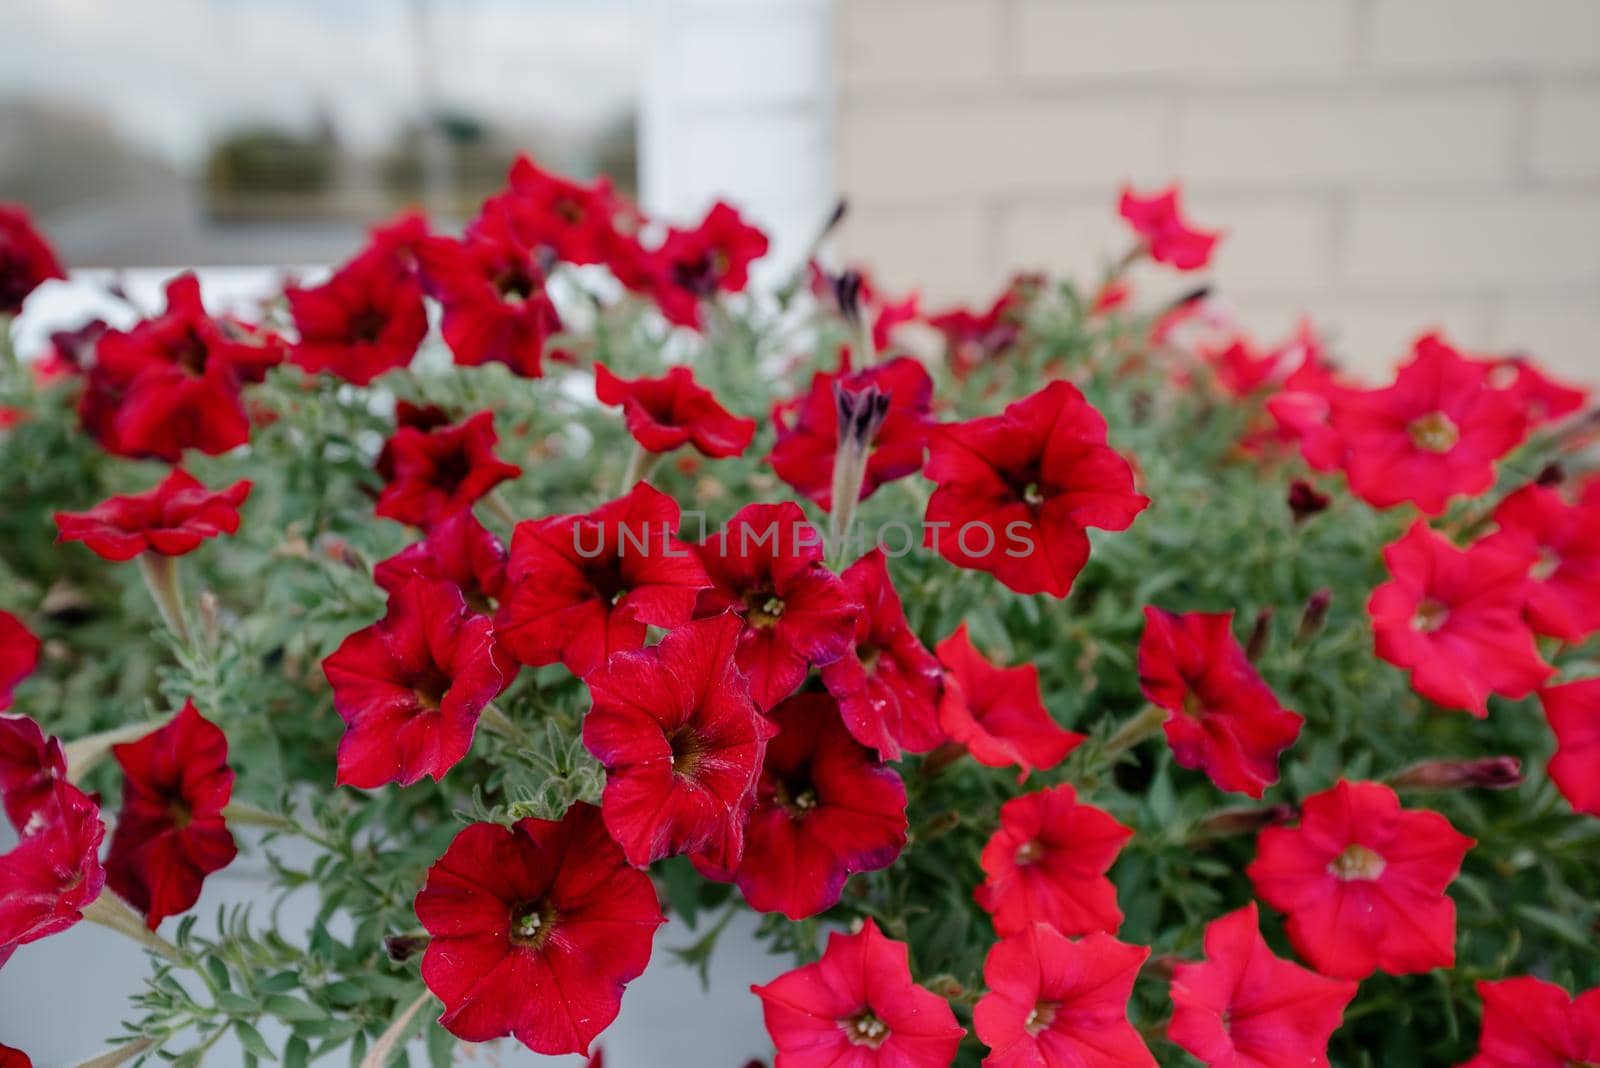 Colourful petunia flowers in vibrant pink and purple colors in decorative flower pot close up, floral wallpaper background with blooming petunias